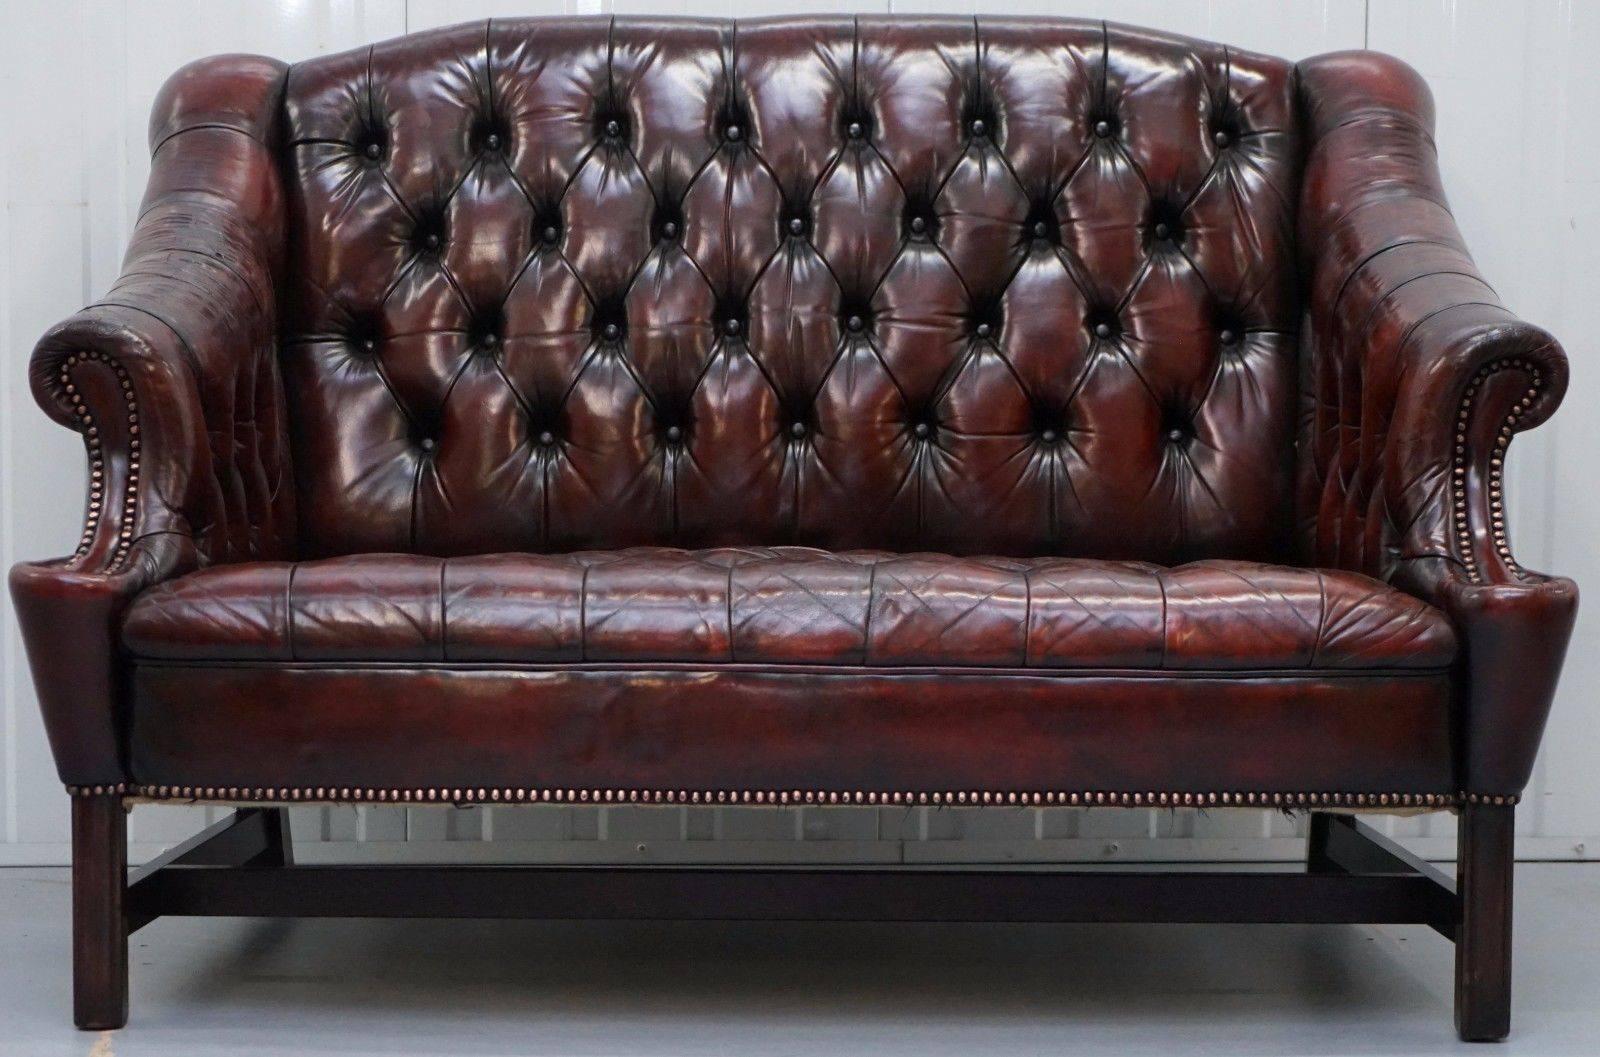 Antique Vintage furniture Wimbledon 

We are delighted to offer for auction this fully restored circa 1960’s Chesterfield oxblood leather two seat bench sofa

Please note the delivery fee listed is just a guide, for an accurate quote please send me